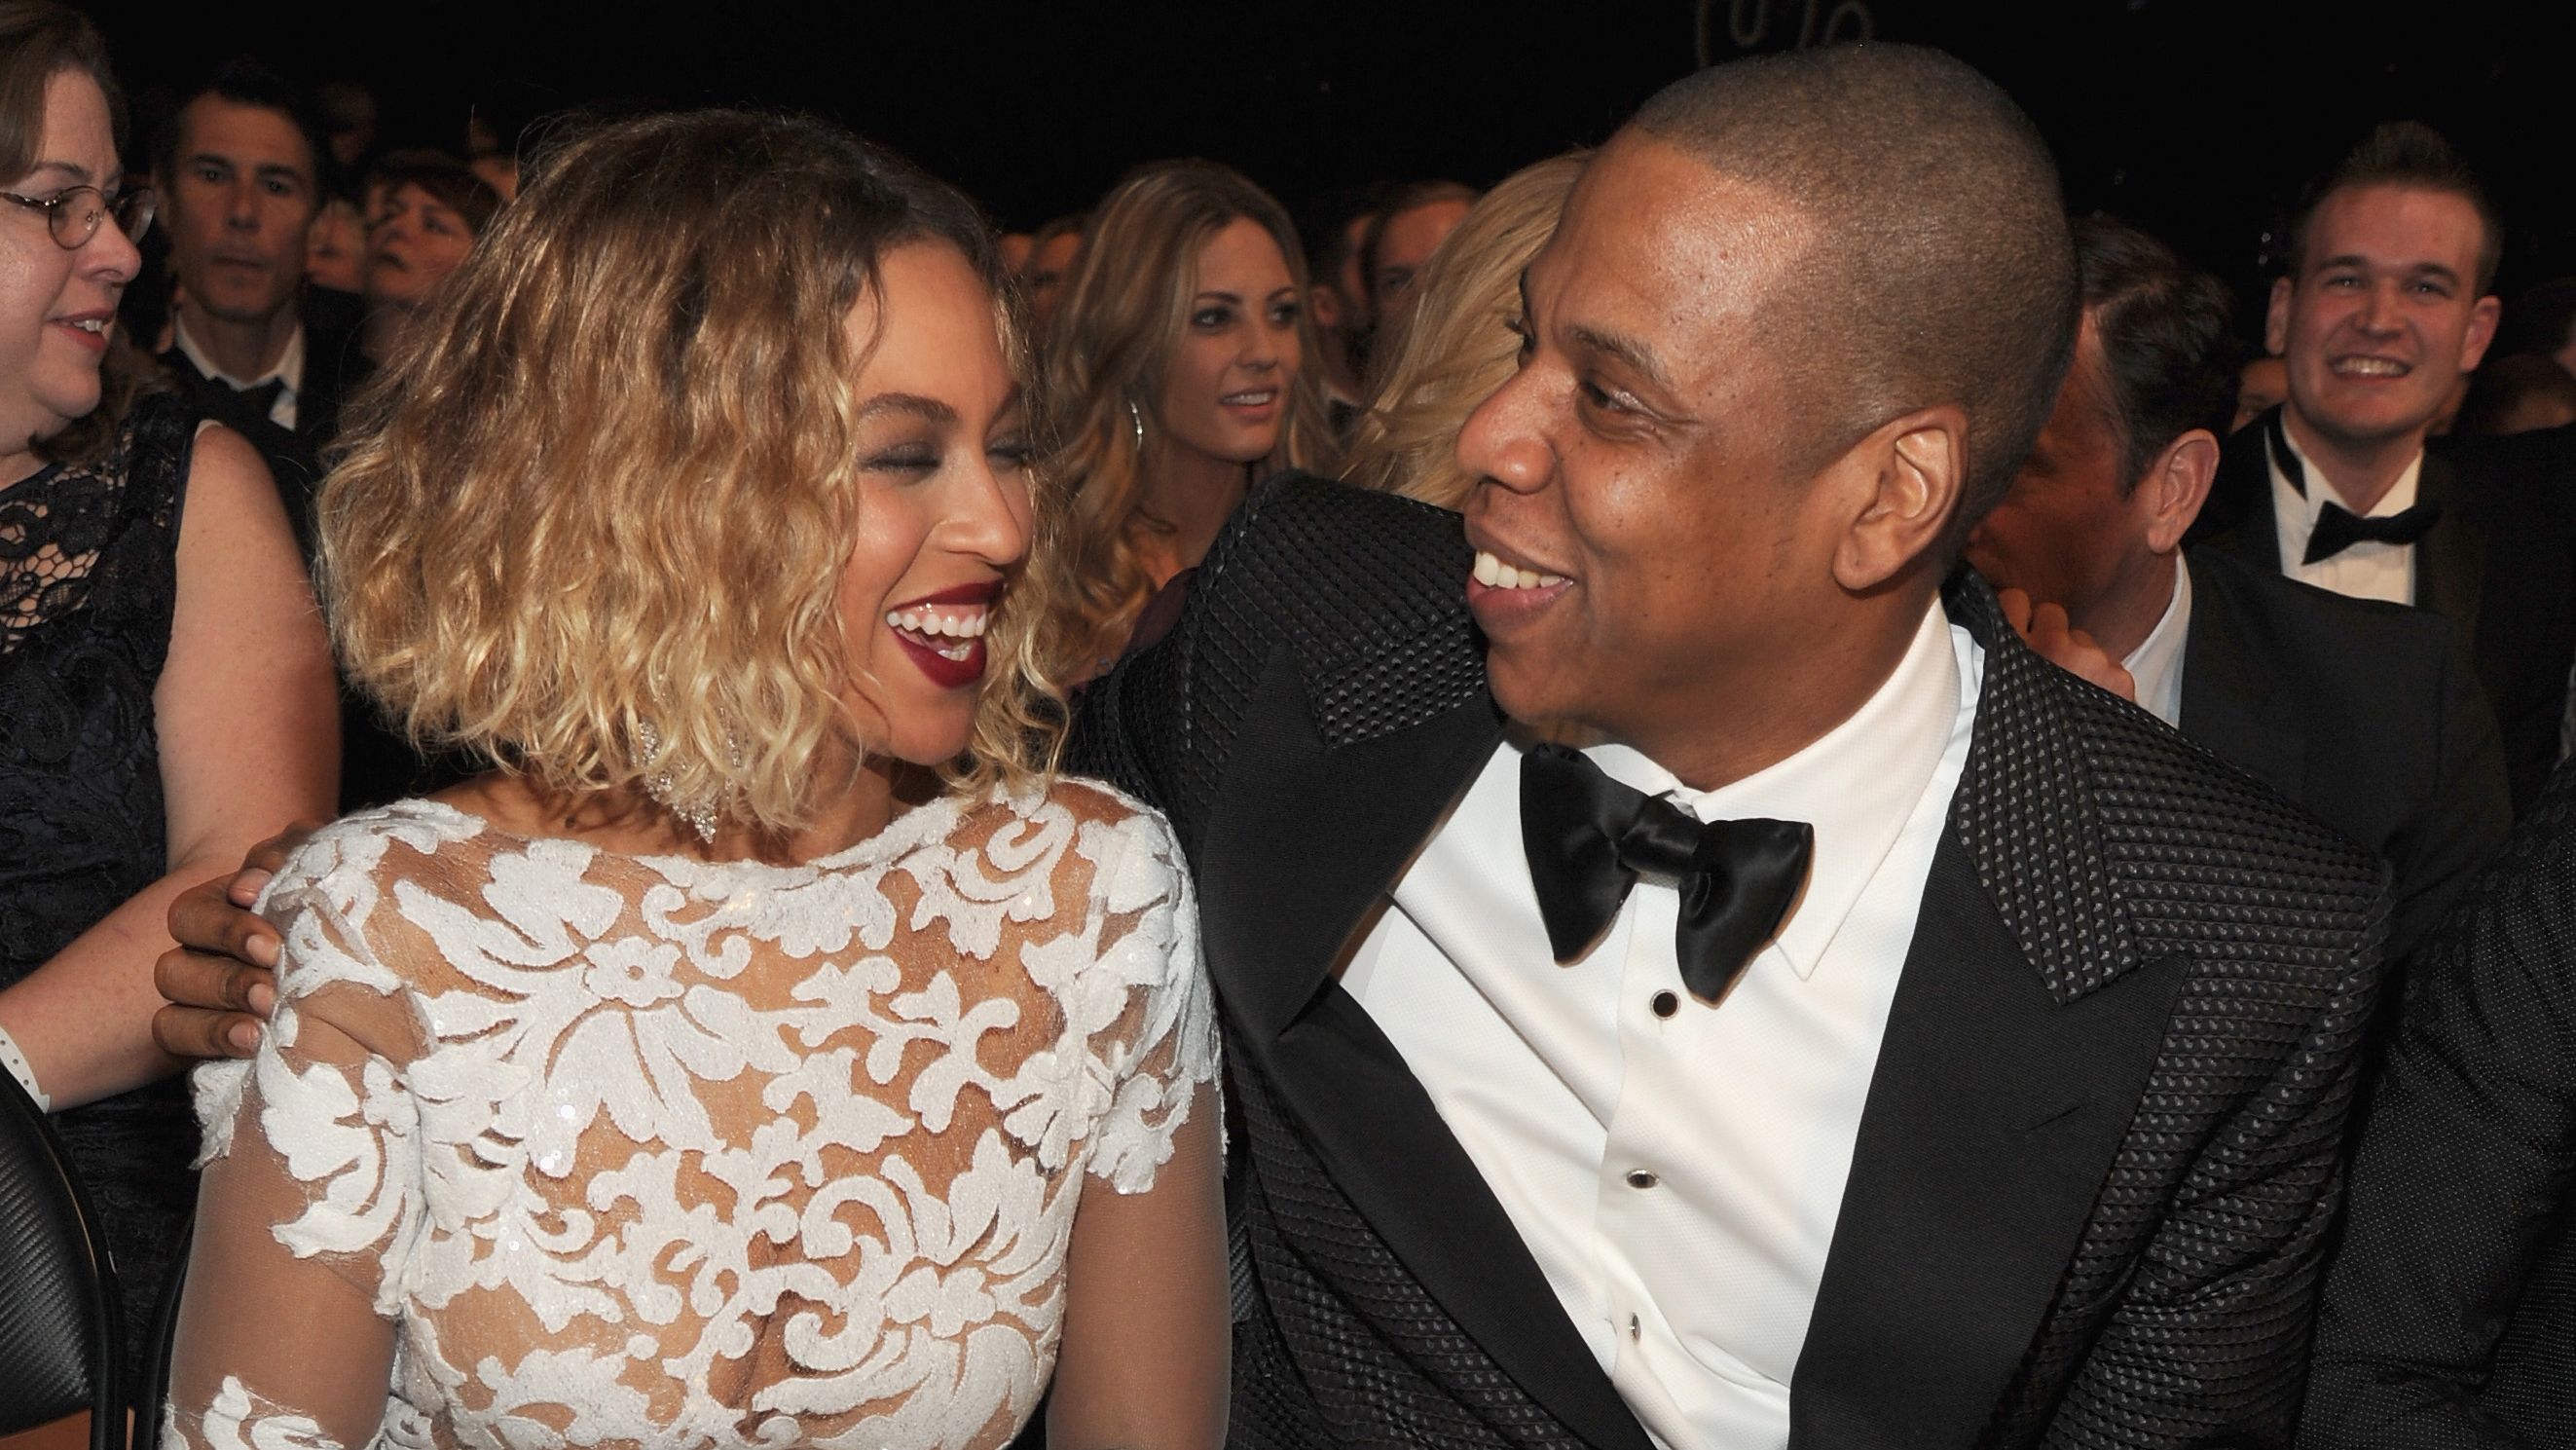 LOS ANGELES, CA - JANUARY 26: Singer Beyonce (L) and rapper Jay-Z attend the 56th GRAMMY Awards at Staples Center on January 26, 2014 in Los Angeles, California. (Photo by Kevin Mazur/WireImage)